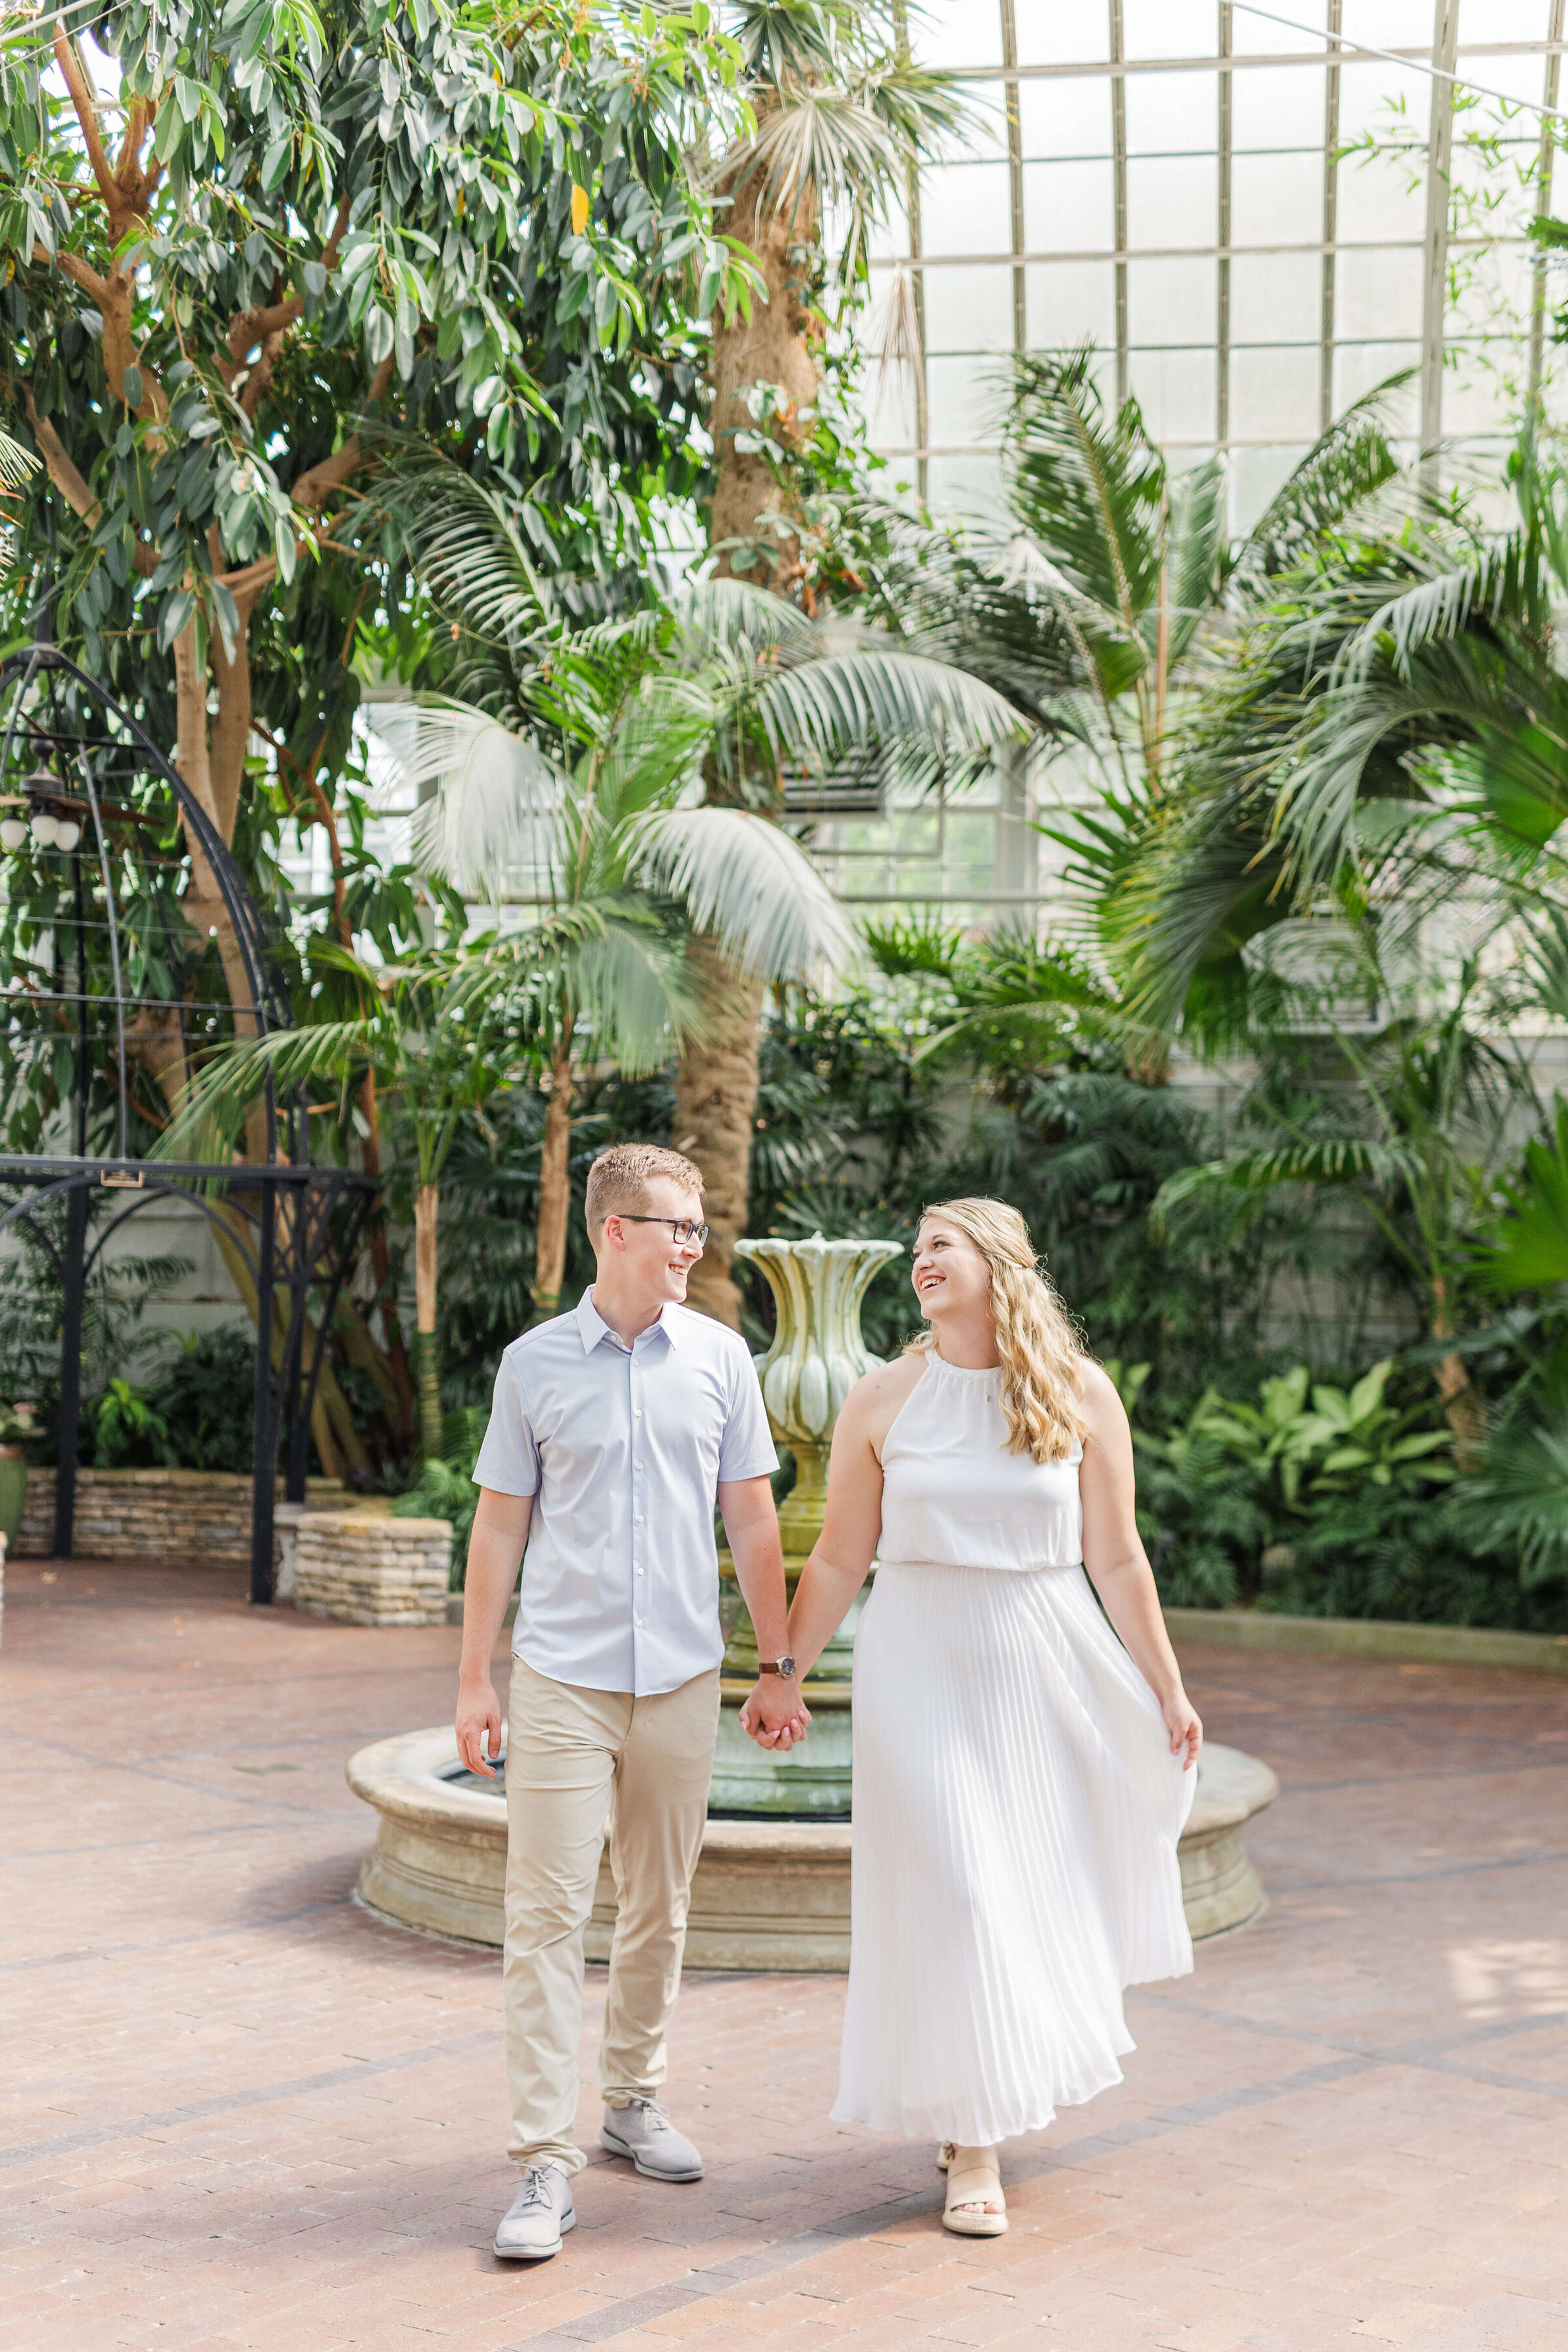 A man and woman hold hands as they walk in a conservatory. There are lots of green plants around. She is wearing a white dress and he is wearing khaki and a blue shirt.